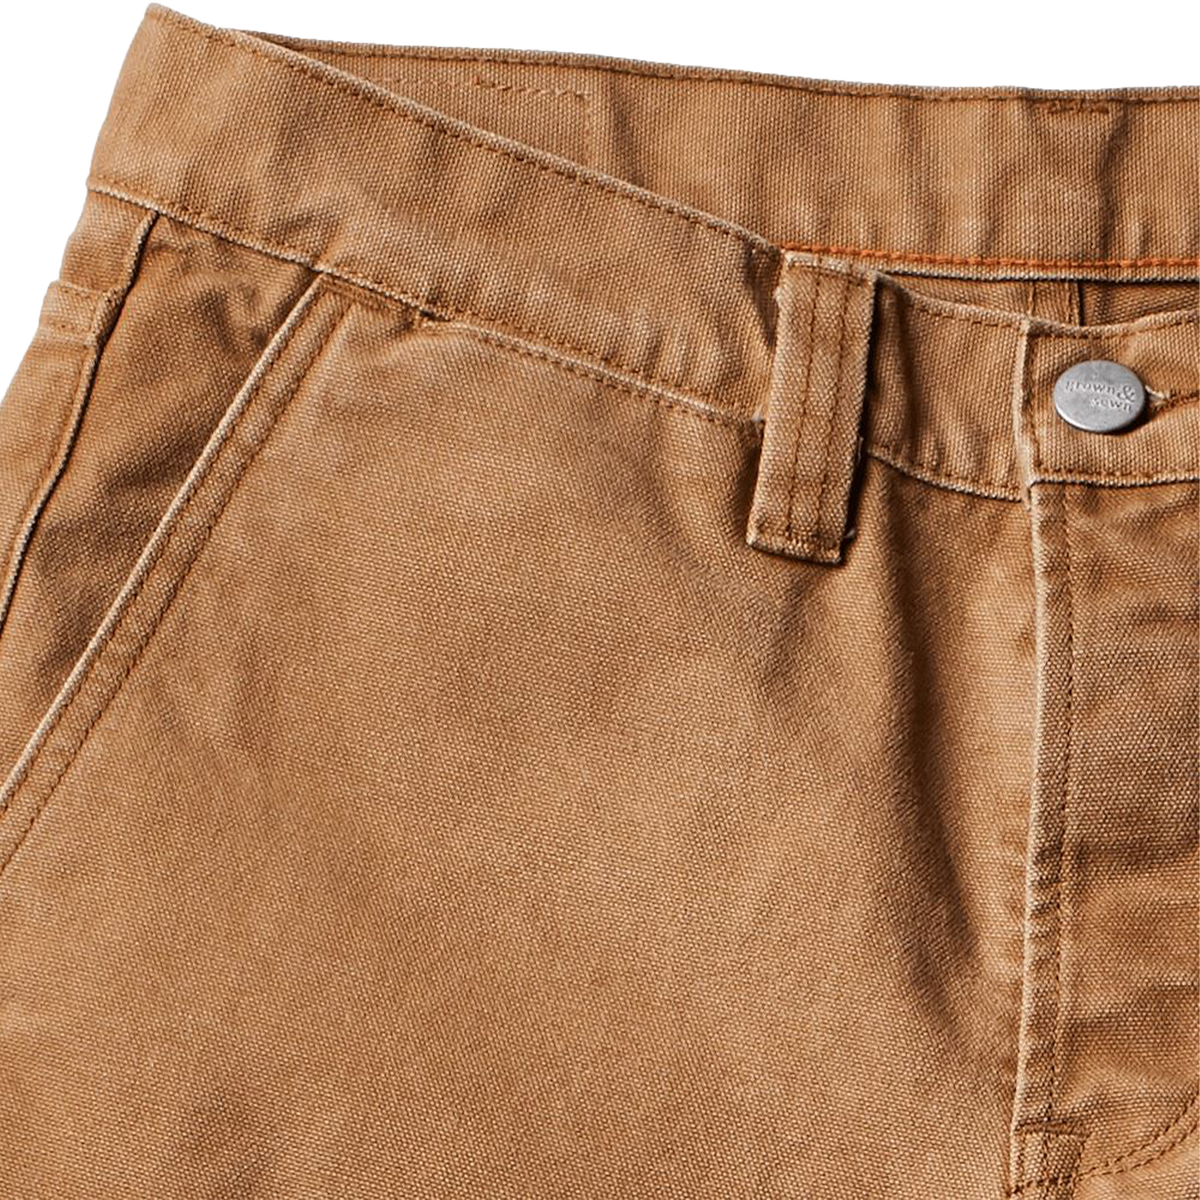 Foundation Canvas Pant - 12 oz. - Camel  ONLY  31